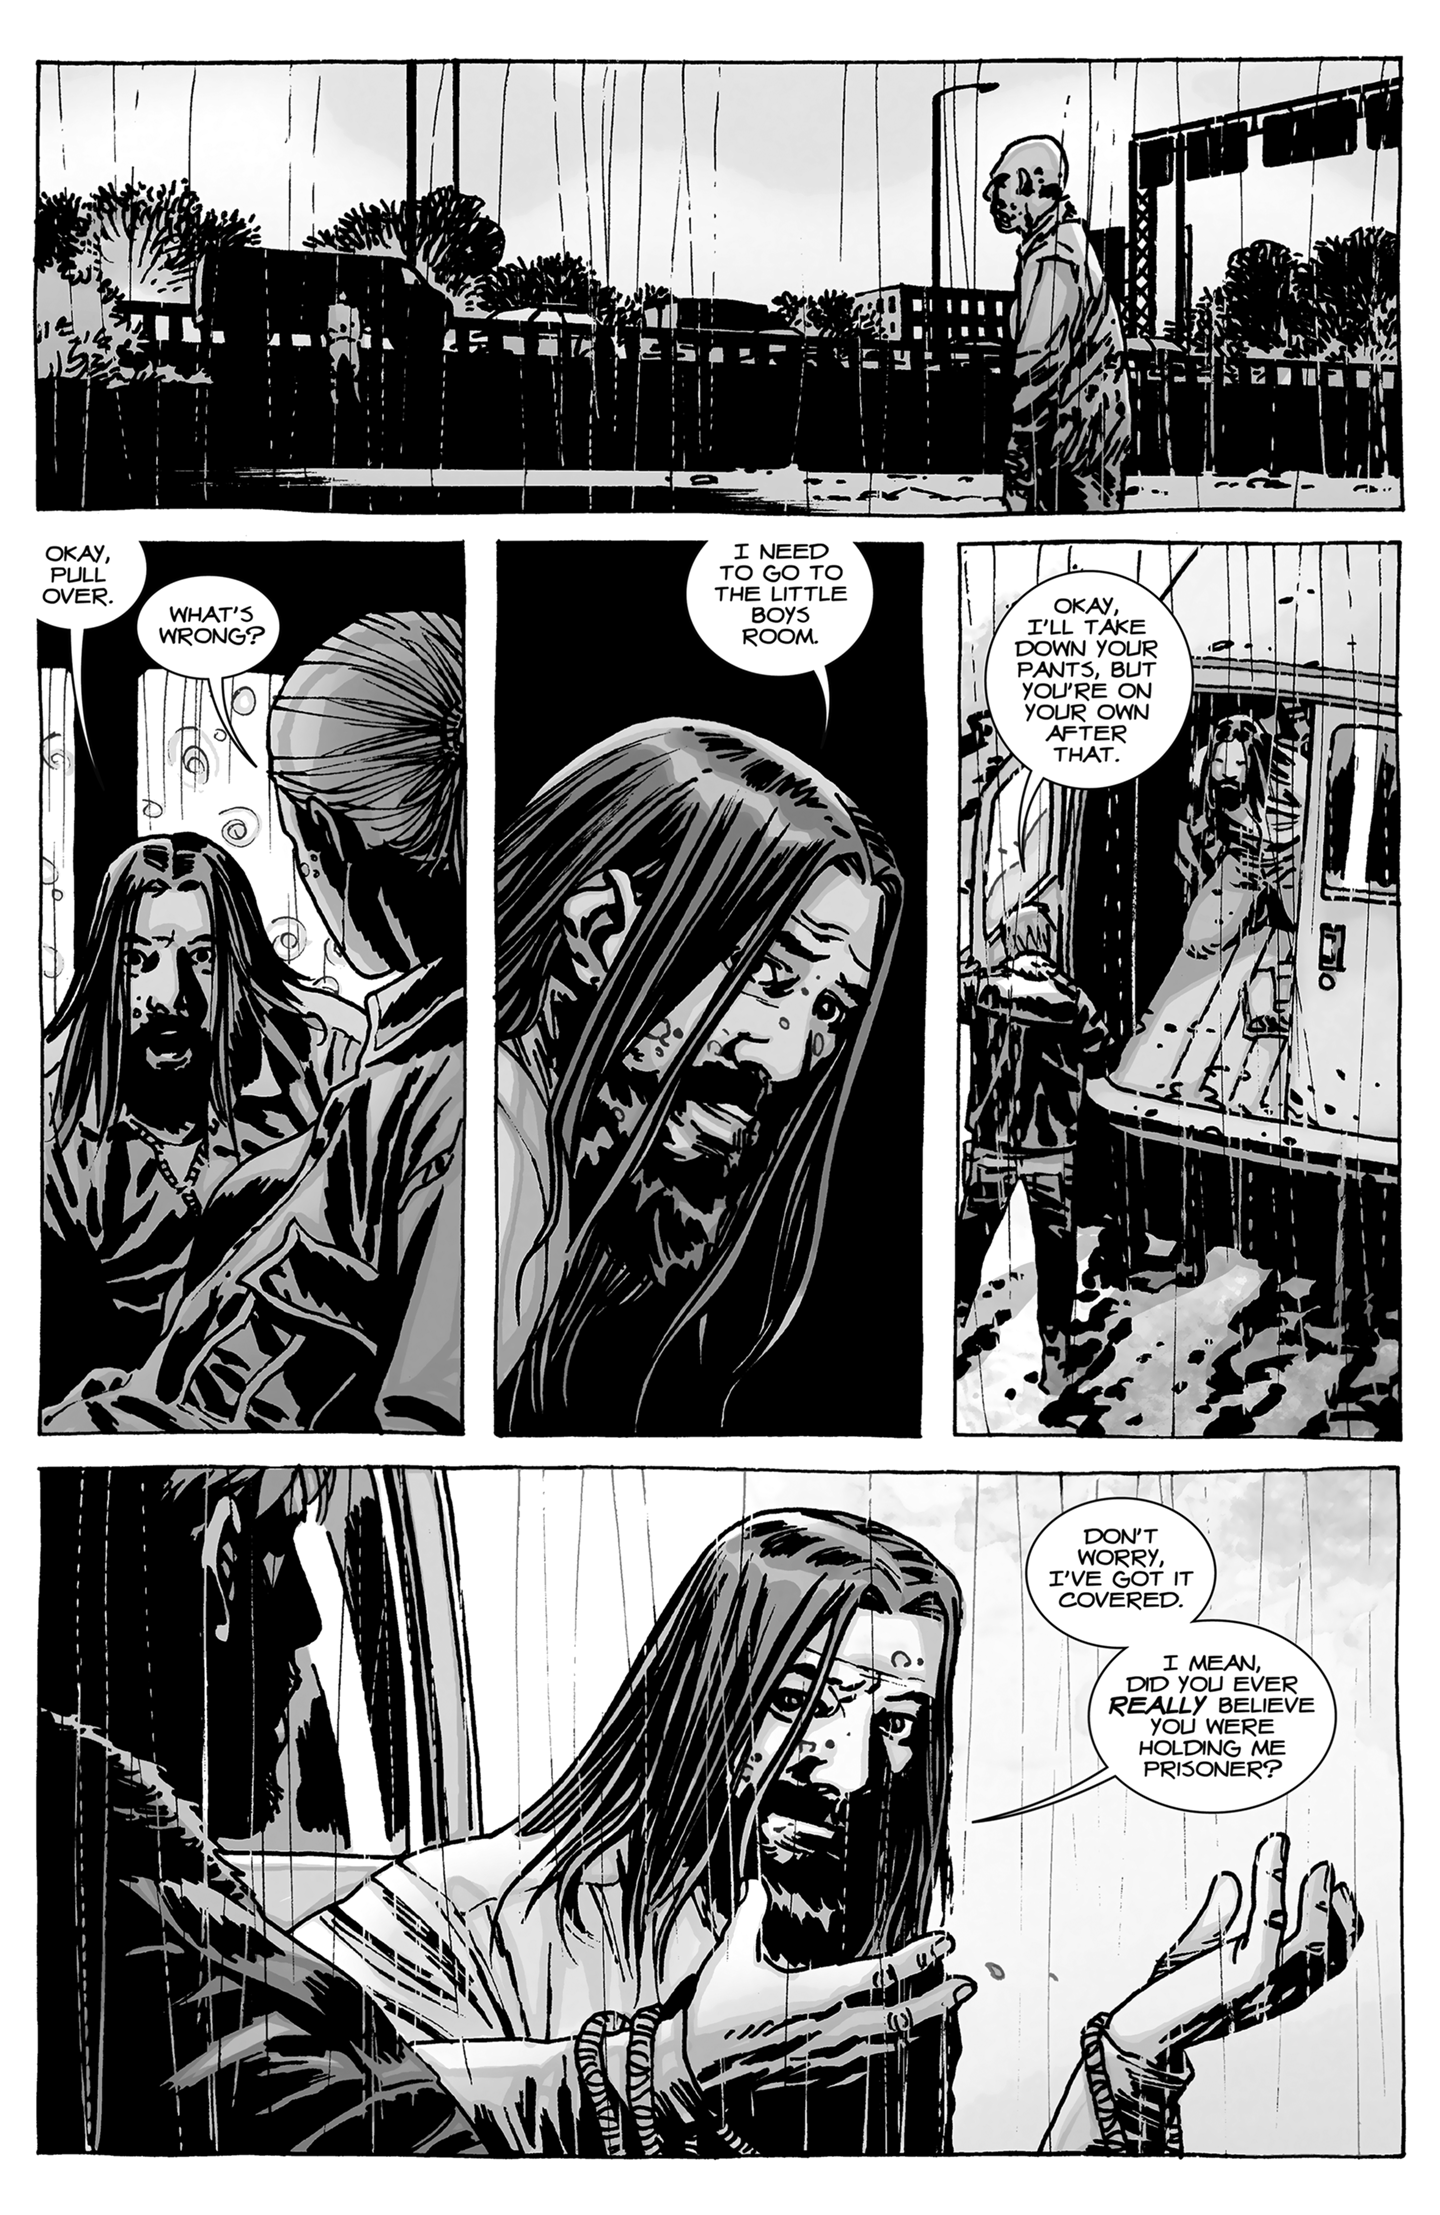 The Walking Dead 94 - A Larger World, Part Two